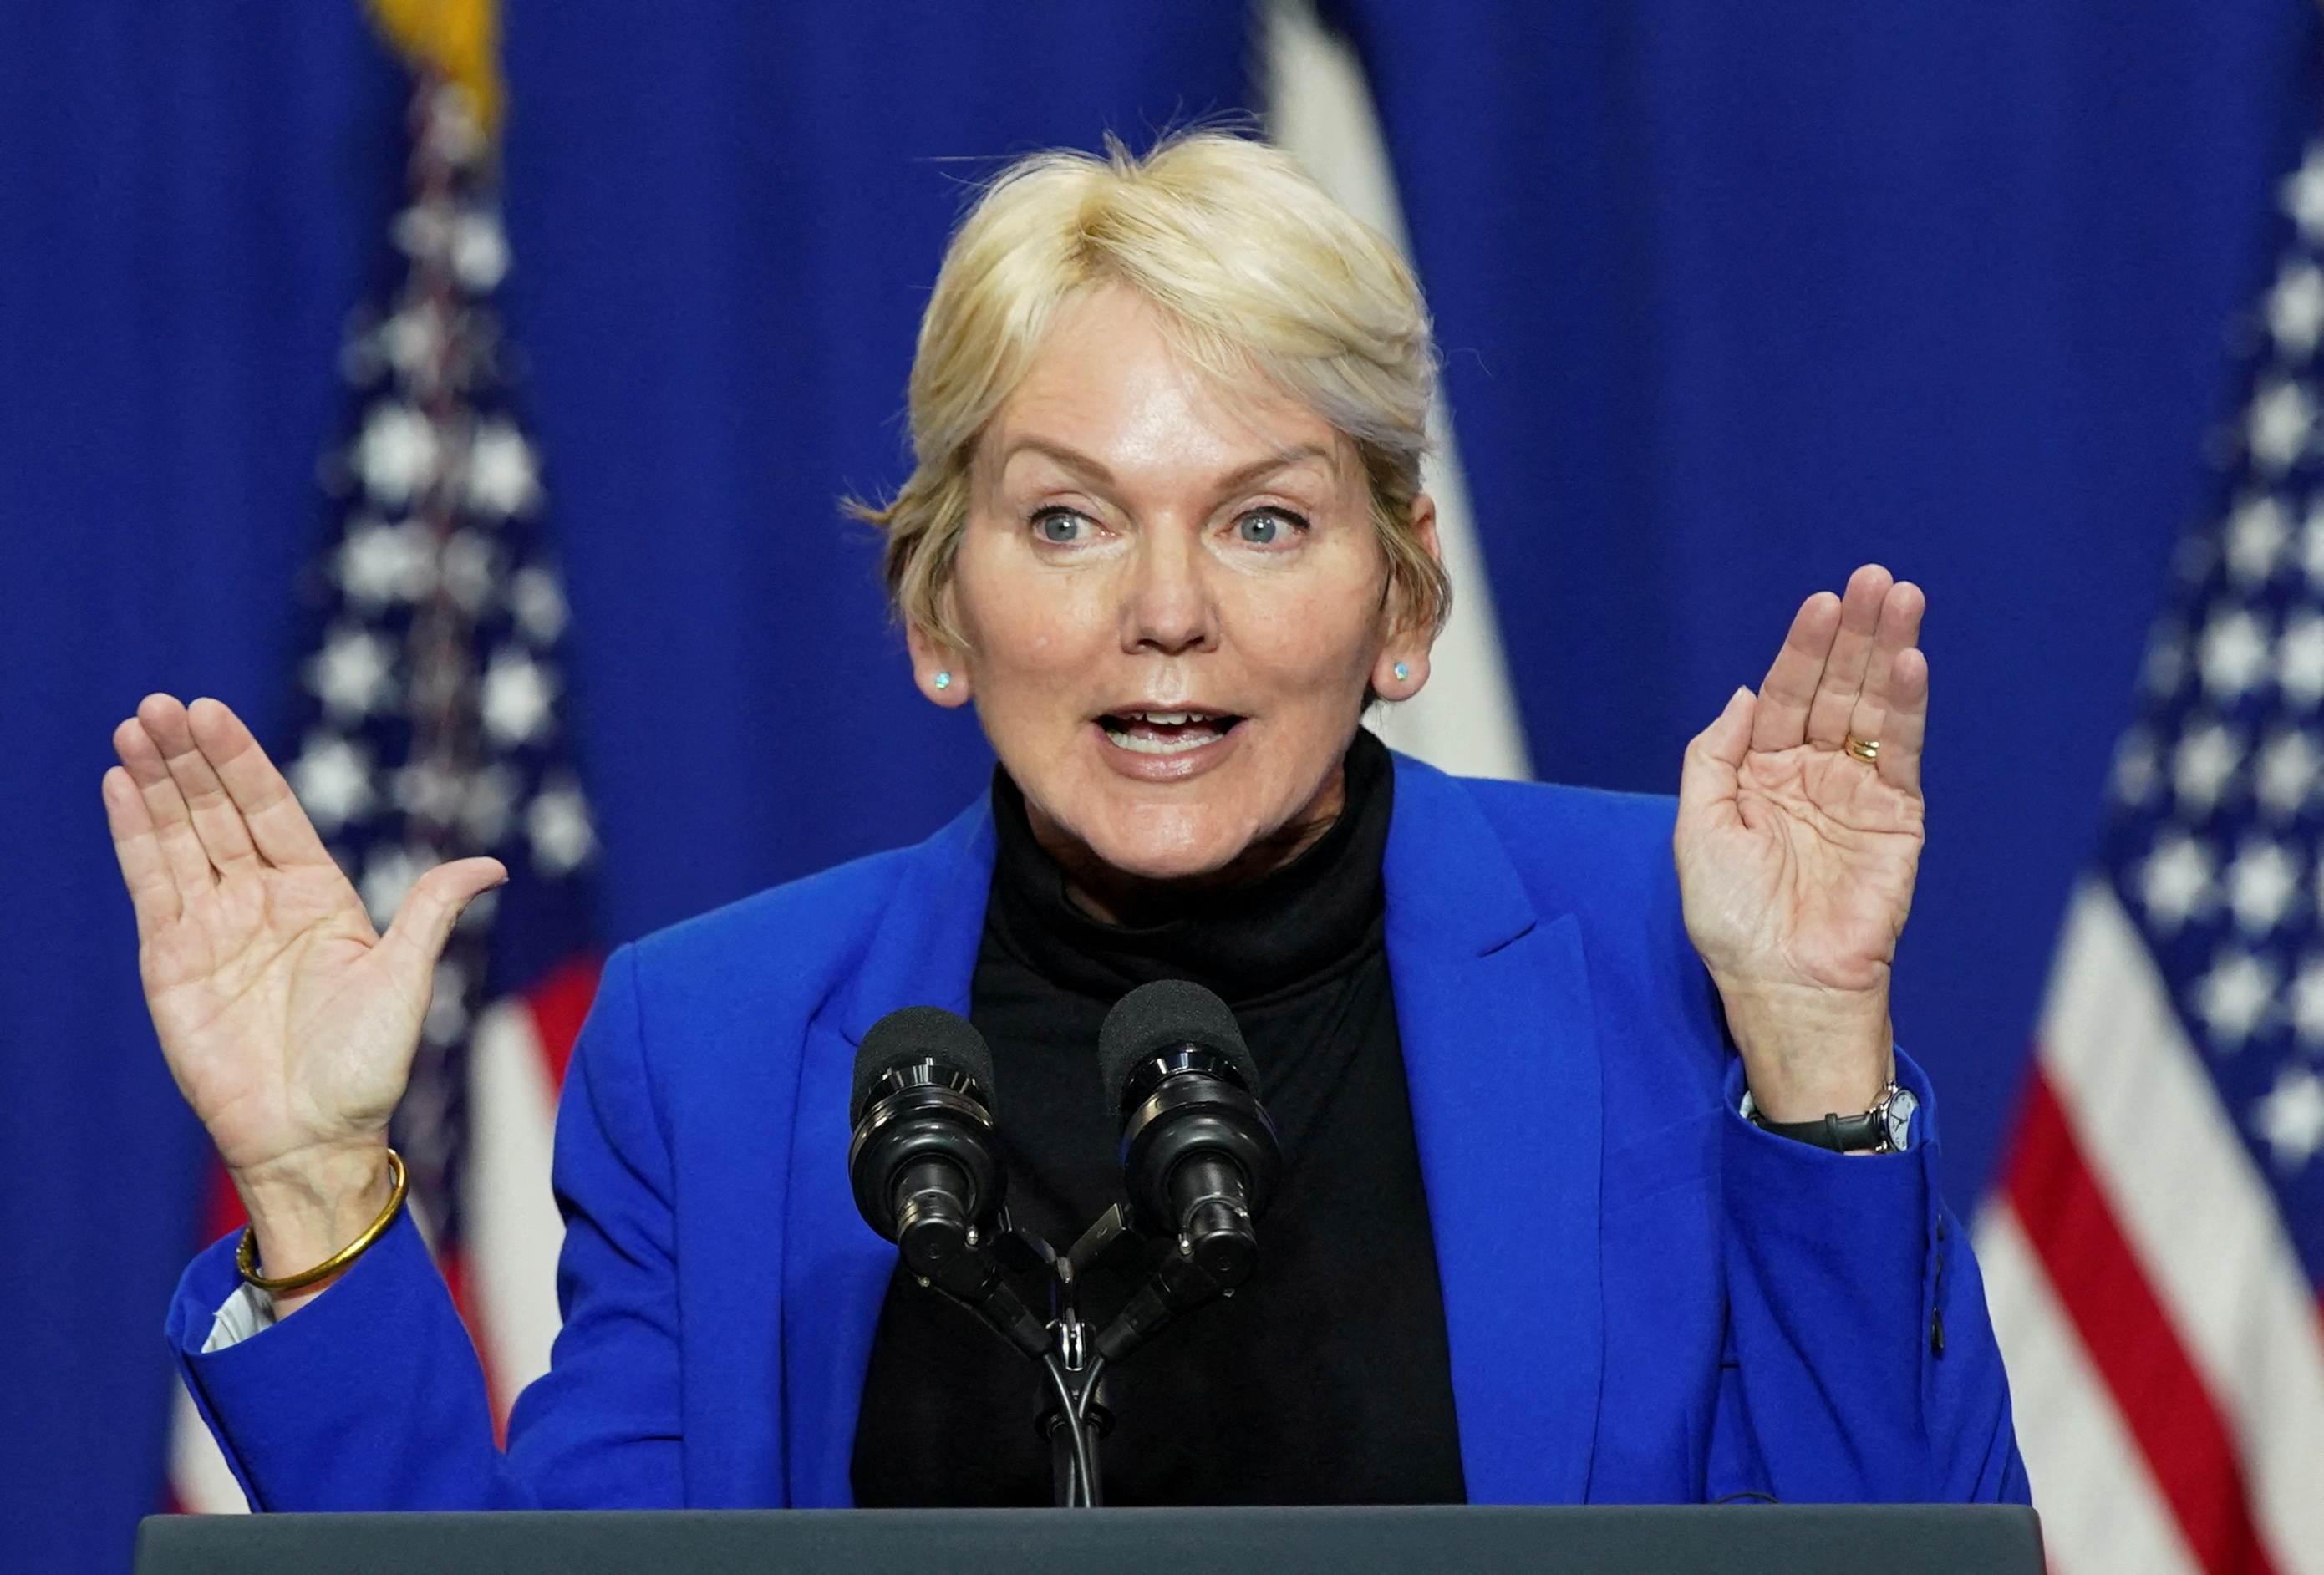 U.S. Energy Secretary Granholm speaks about the administration's electric vehicle charging action plan at an event in Maryland